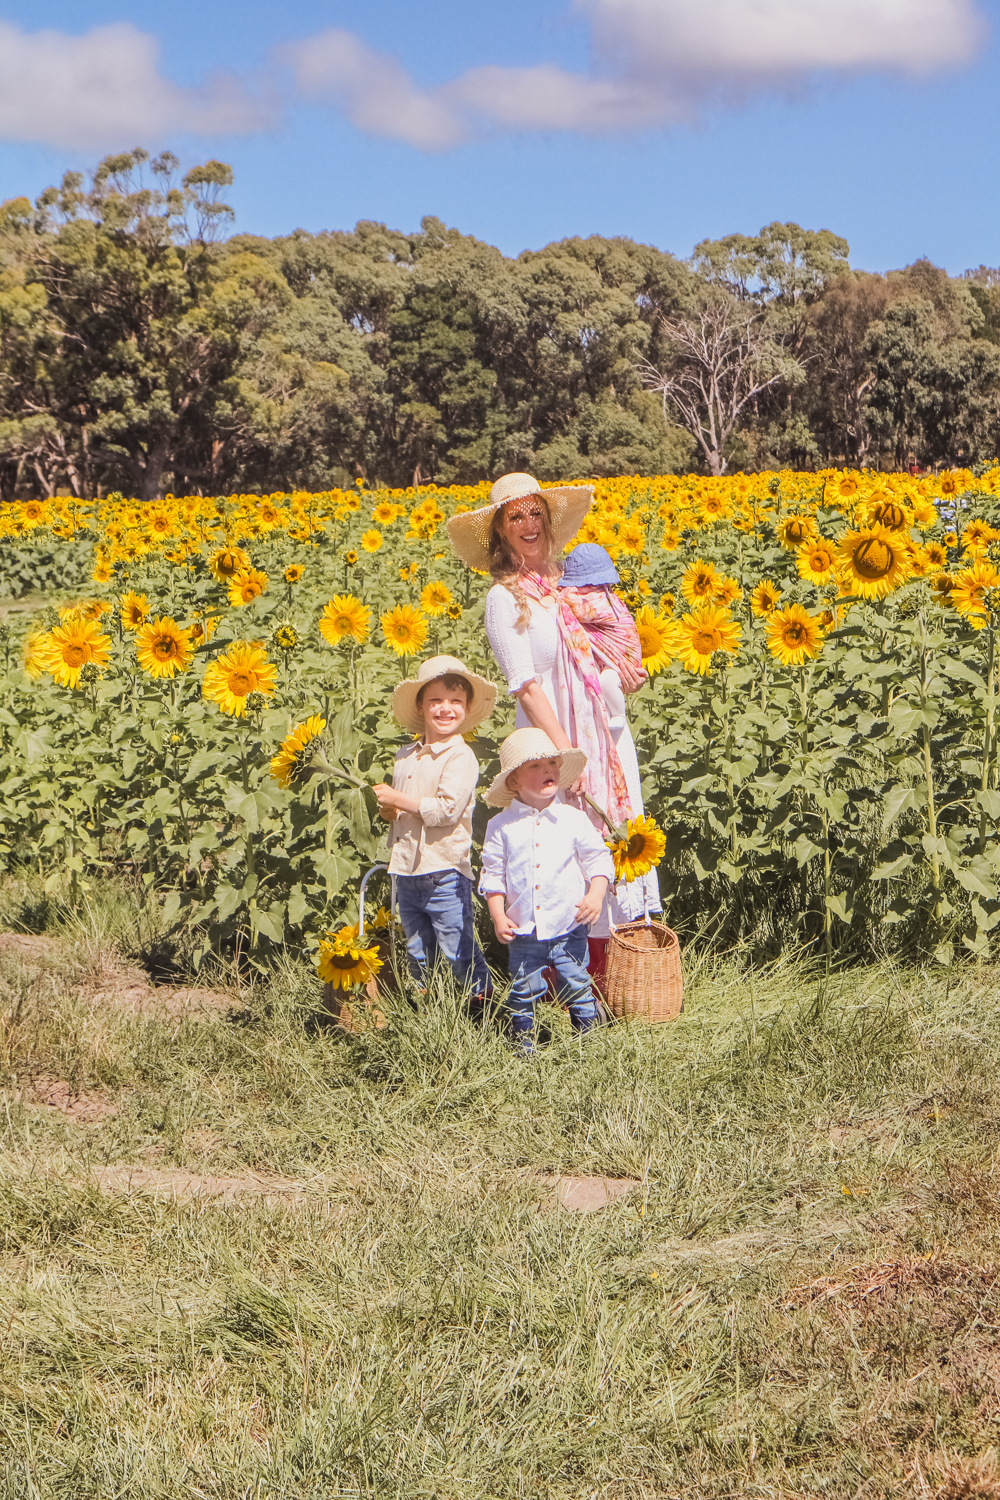 Goldfields Girl with her kids in the sunflower field near Ballarat holding giant sunflowers and wearing straw hats